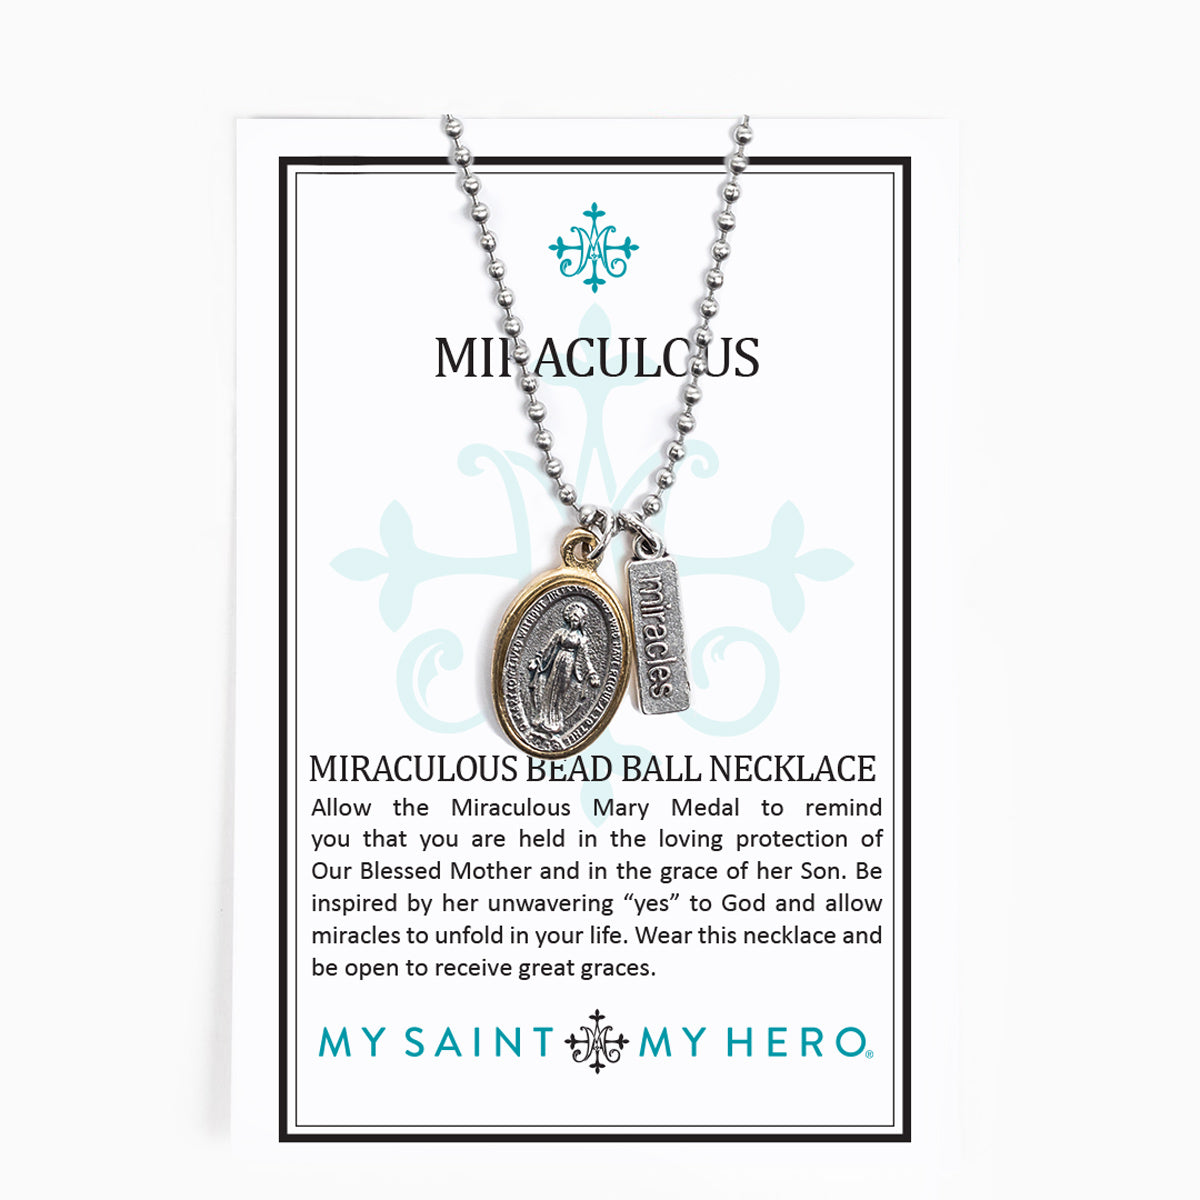 Miraculous Bead Ball Necklace